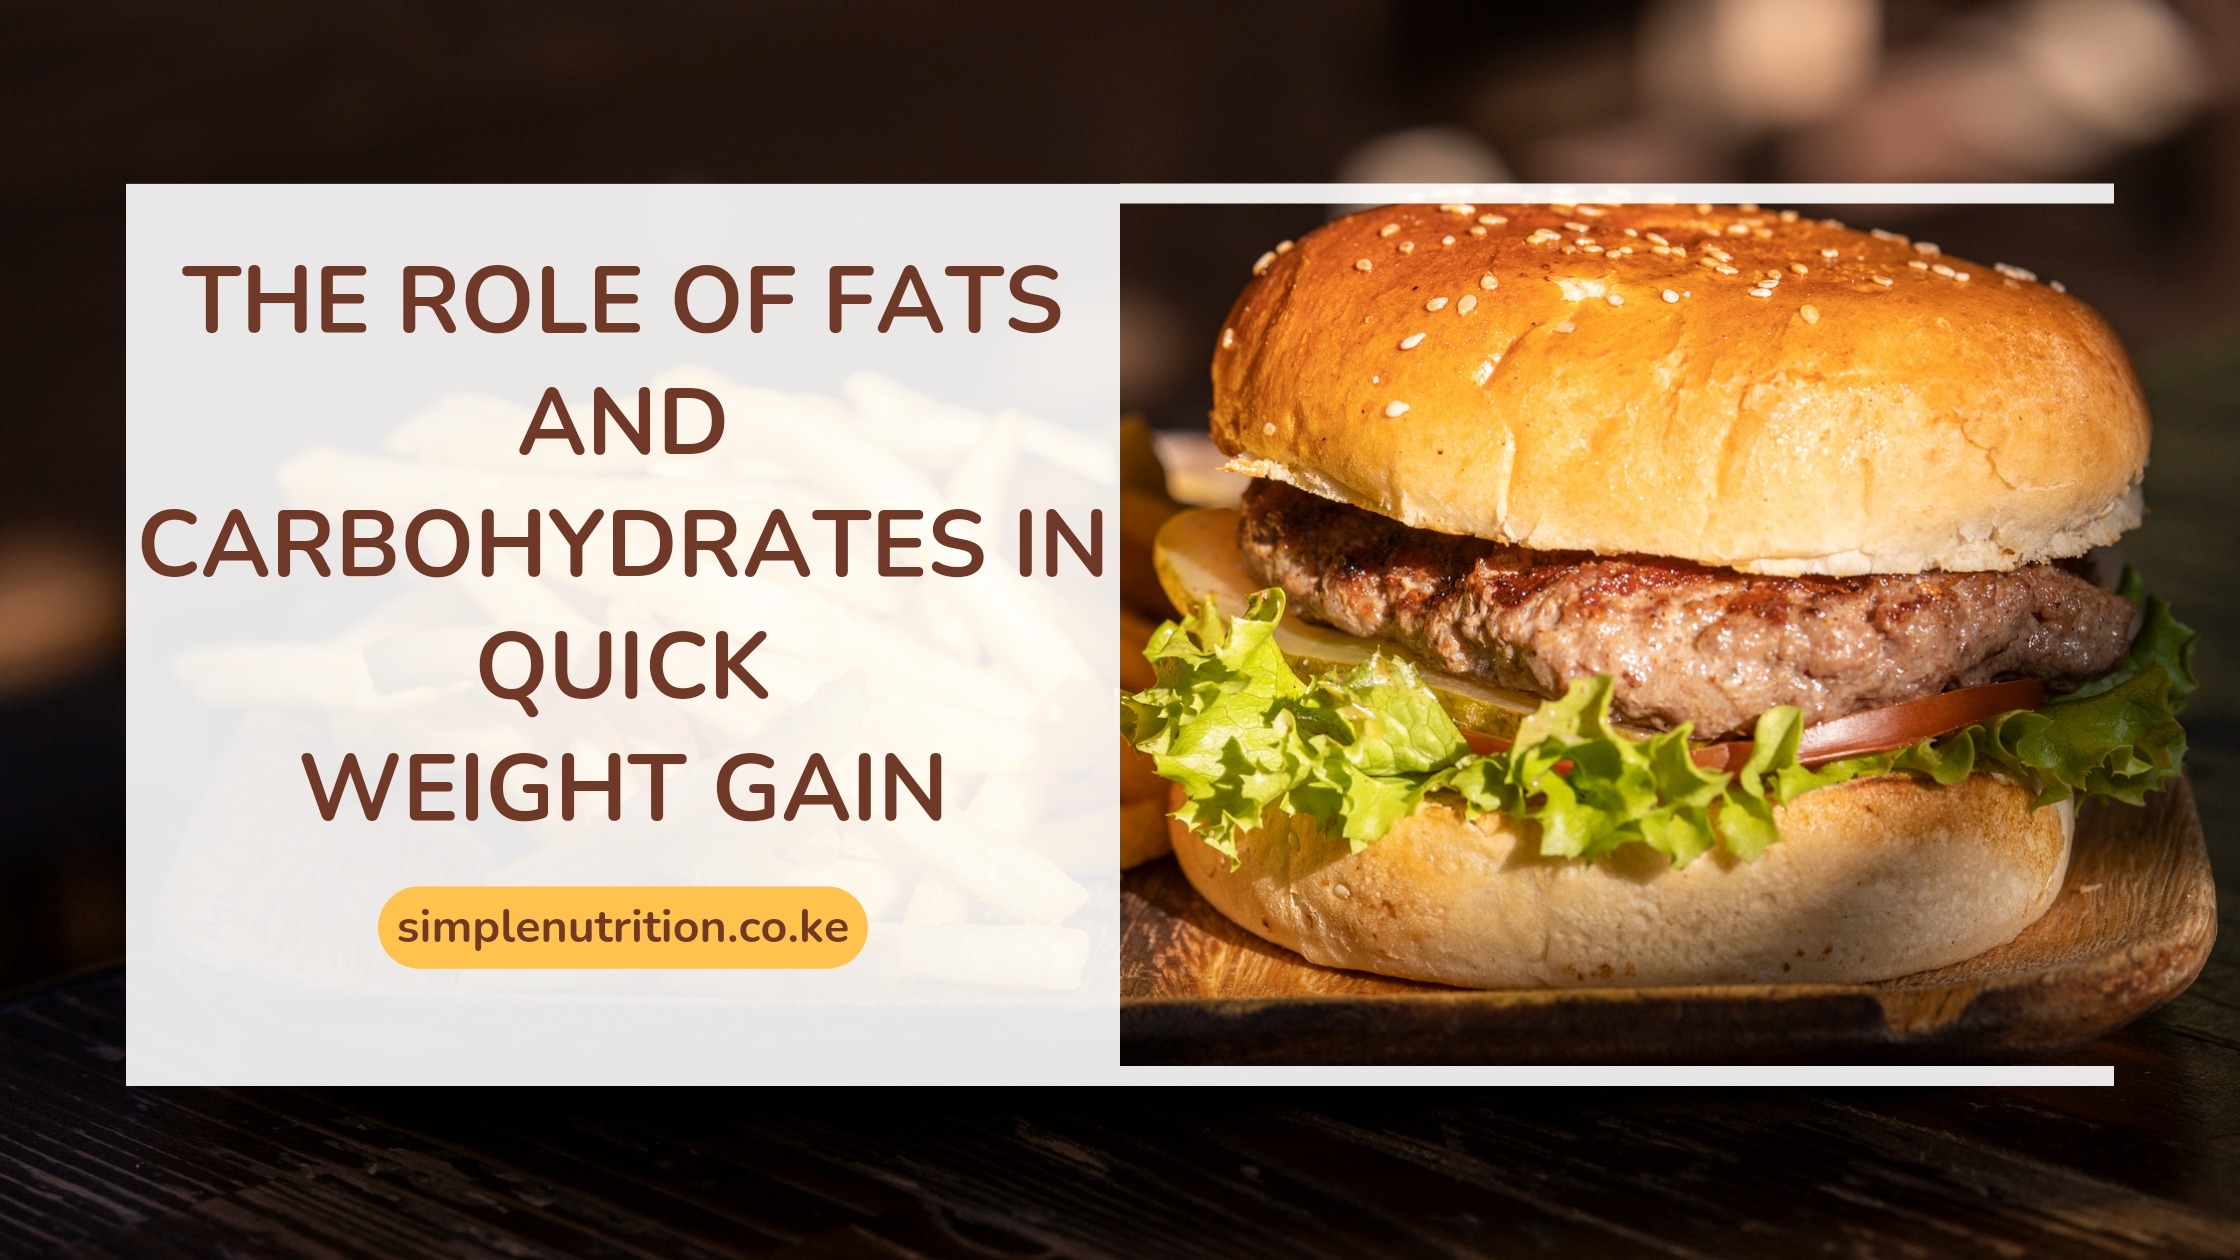 The Role of Fats and Carbohydrates in Quick Weight Gain